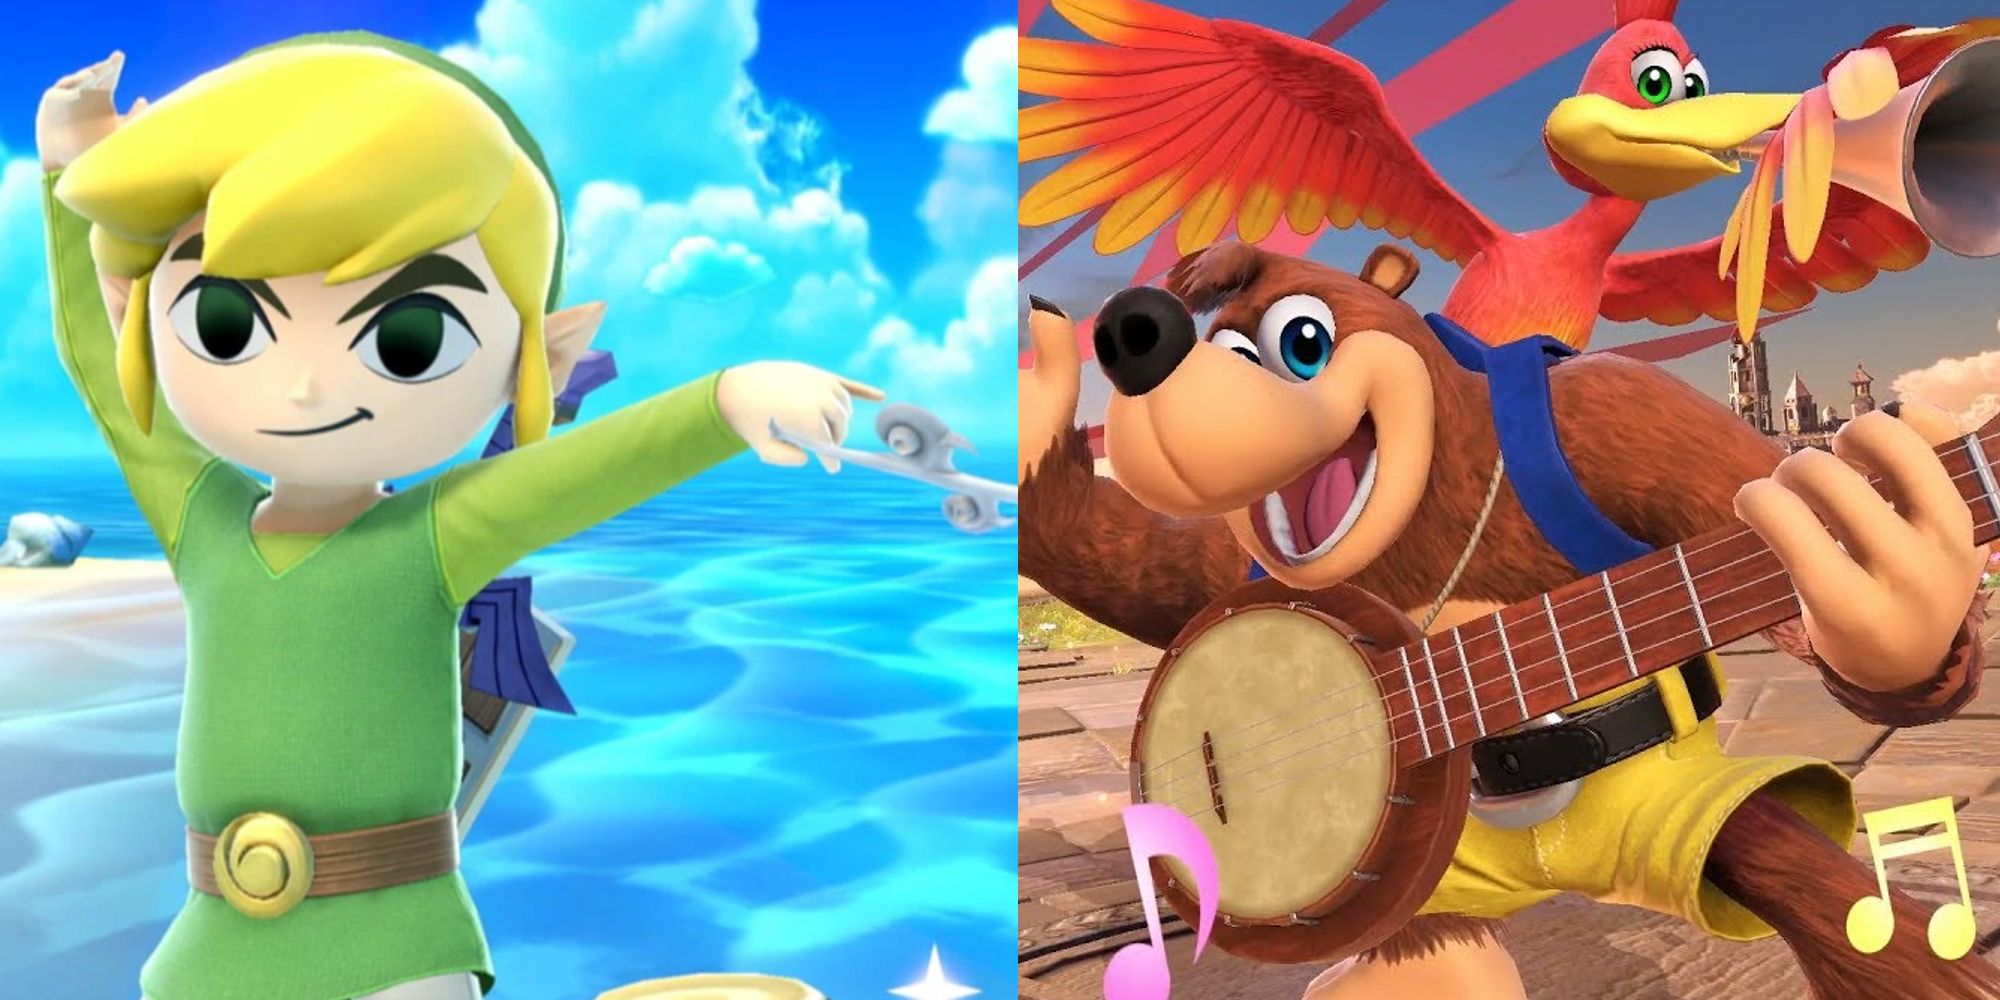 Toon Link taunting with the Wind Waker; Banjo-Kazooie with their instruments in a victory pose